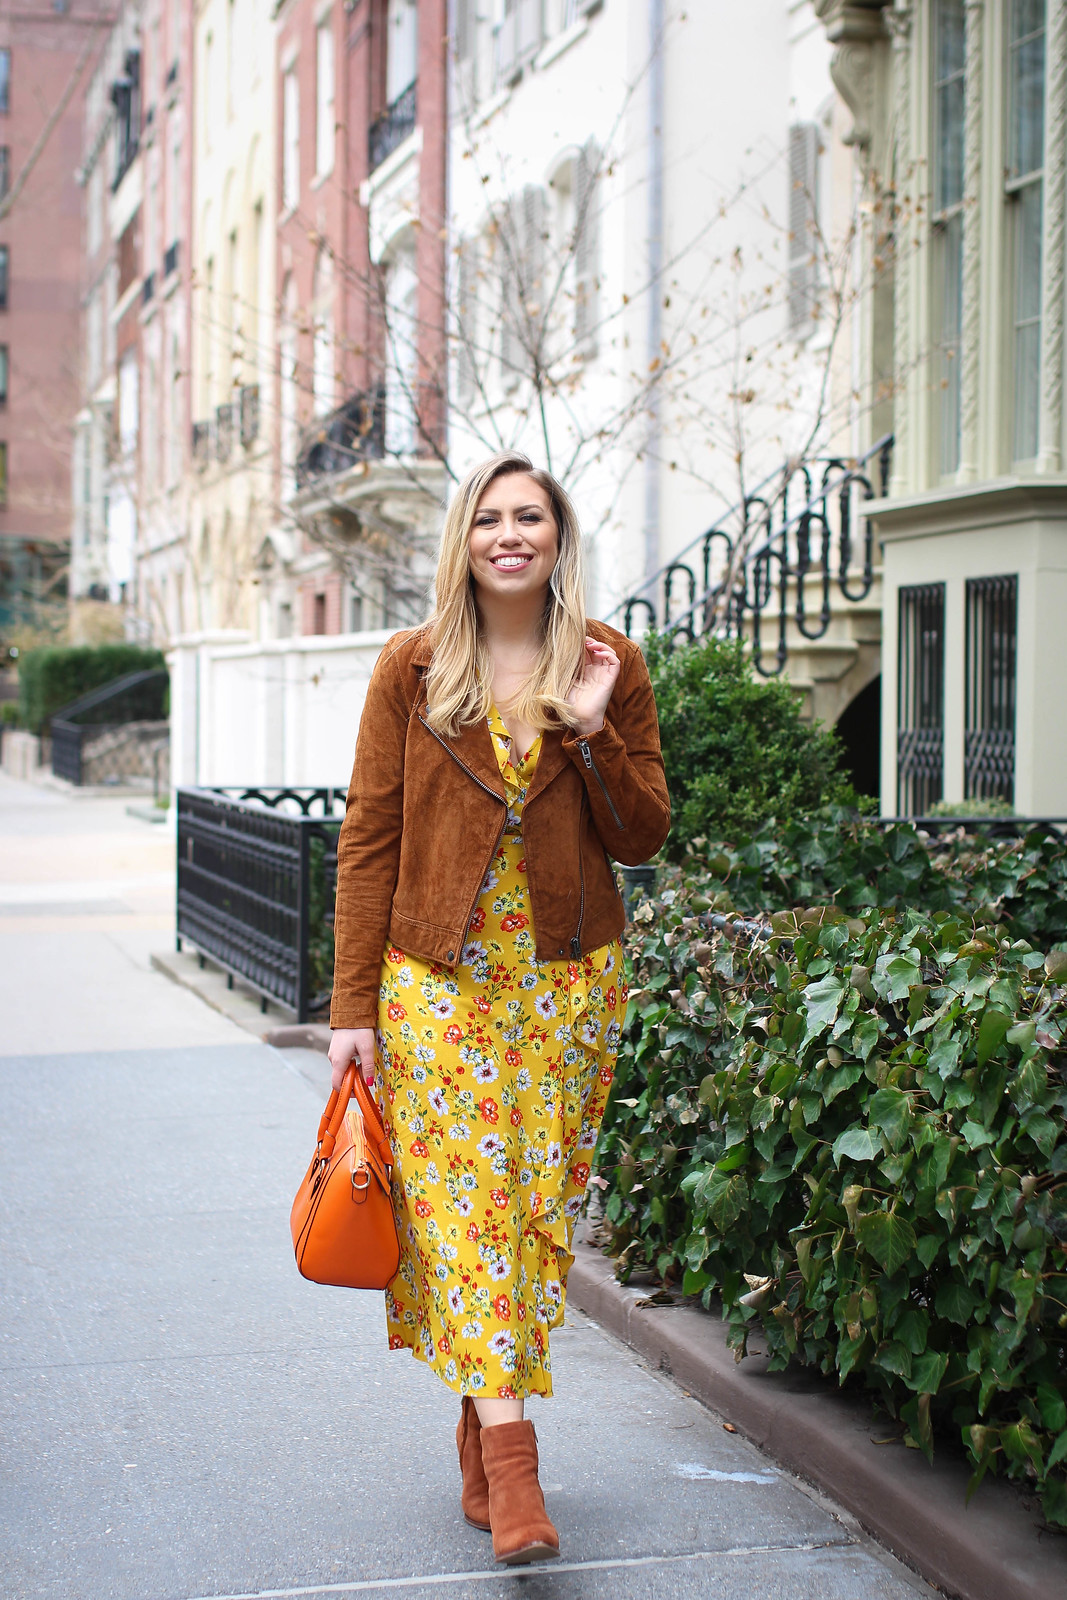 Yellow Floral Maxi Wrap Dress Suede Moto Jacket Orange Bag Suede Booties Spring in NY Outfit Inspiration Fashion Blogger Jackie Giardina